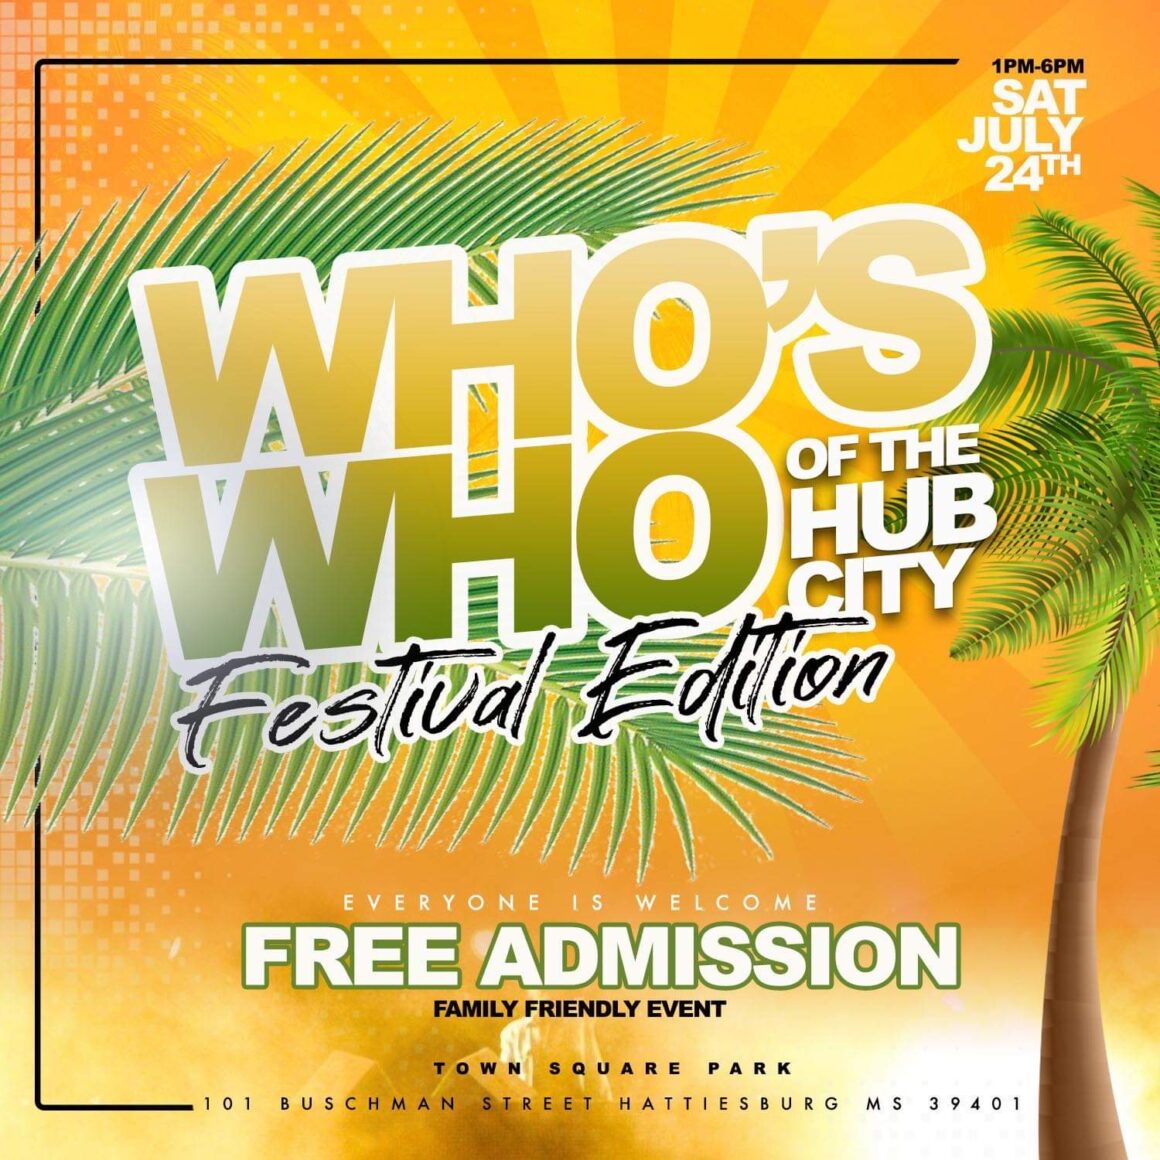 Who’s who of the Hub City Festival Edition City of Hattiesburg